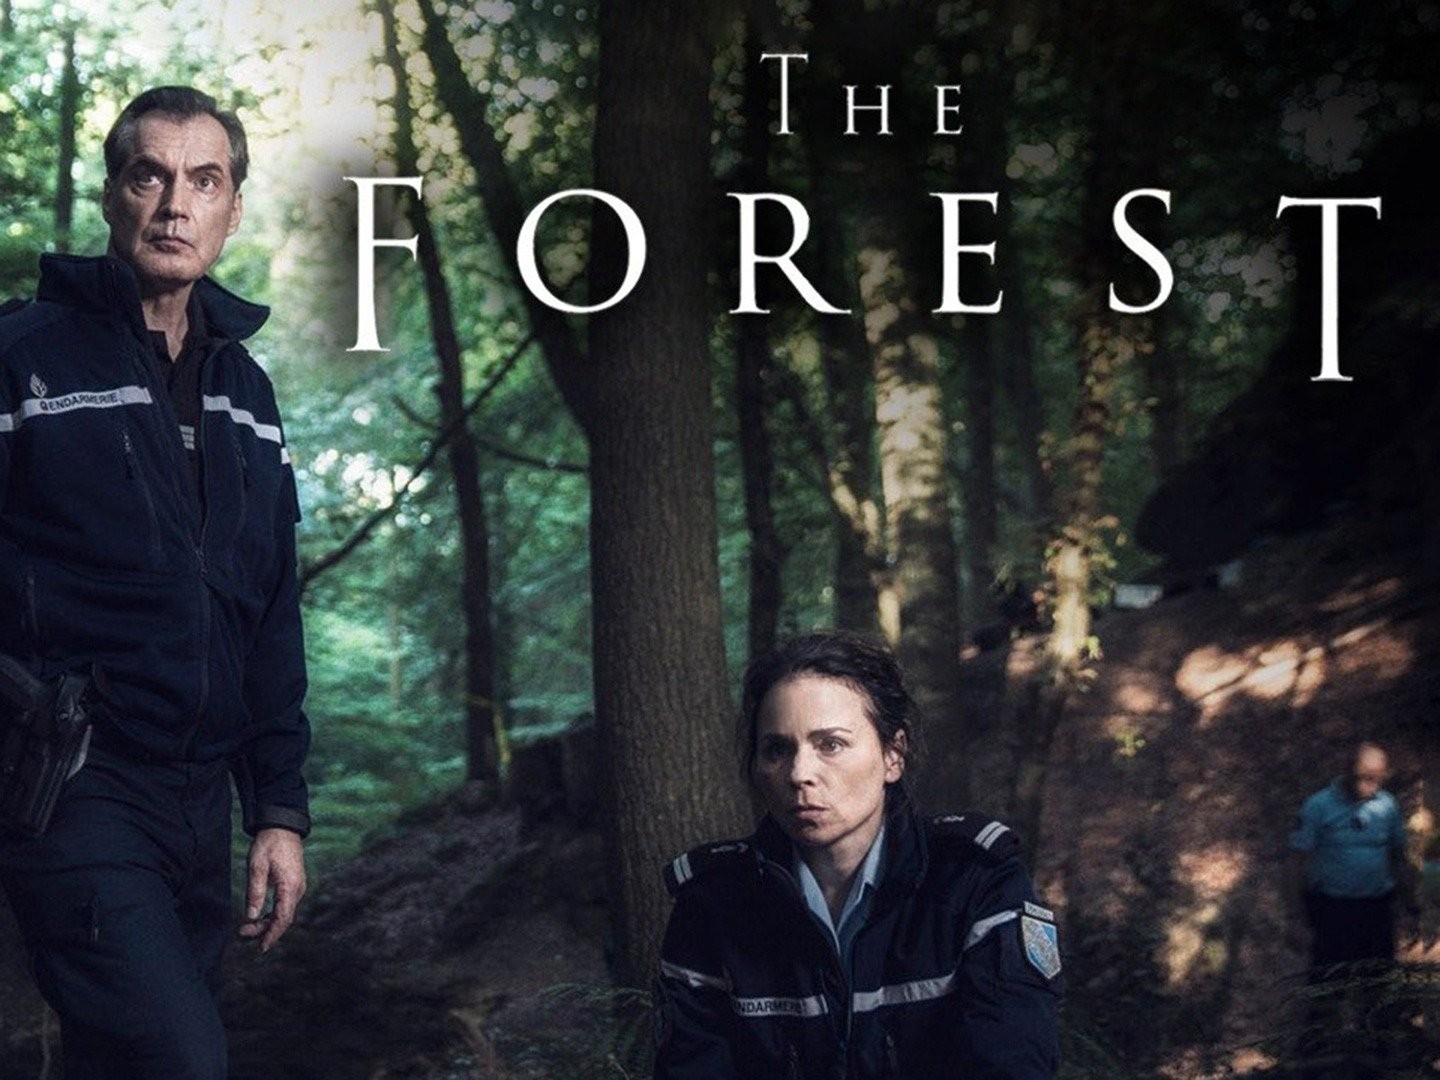 The Forest (TV series) - Wikipedia